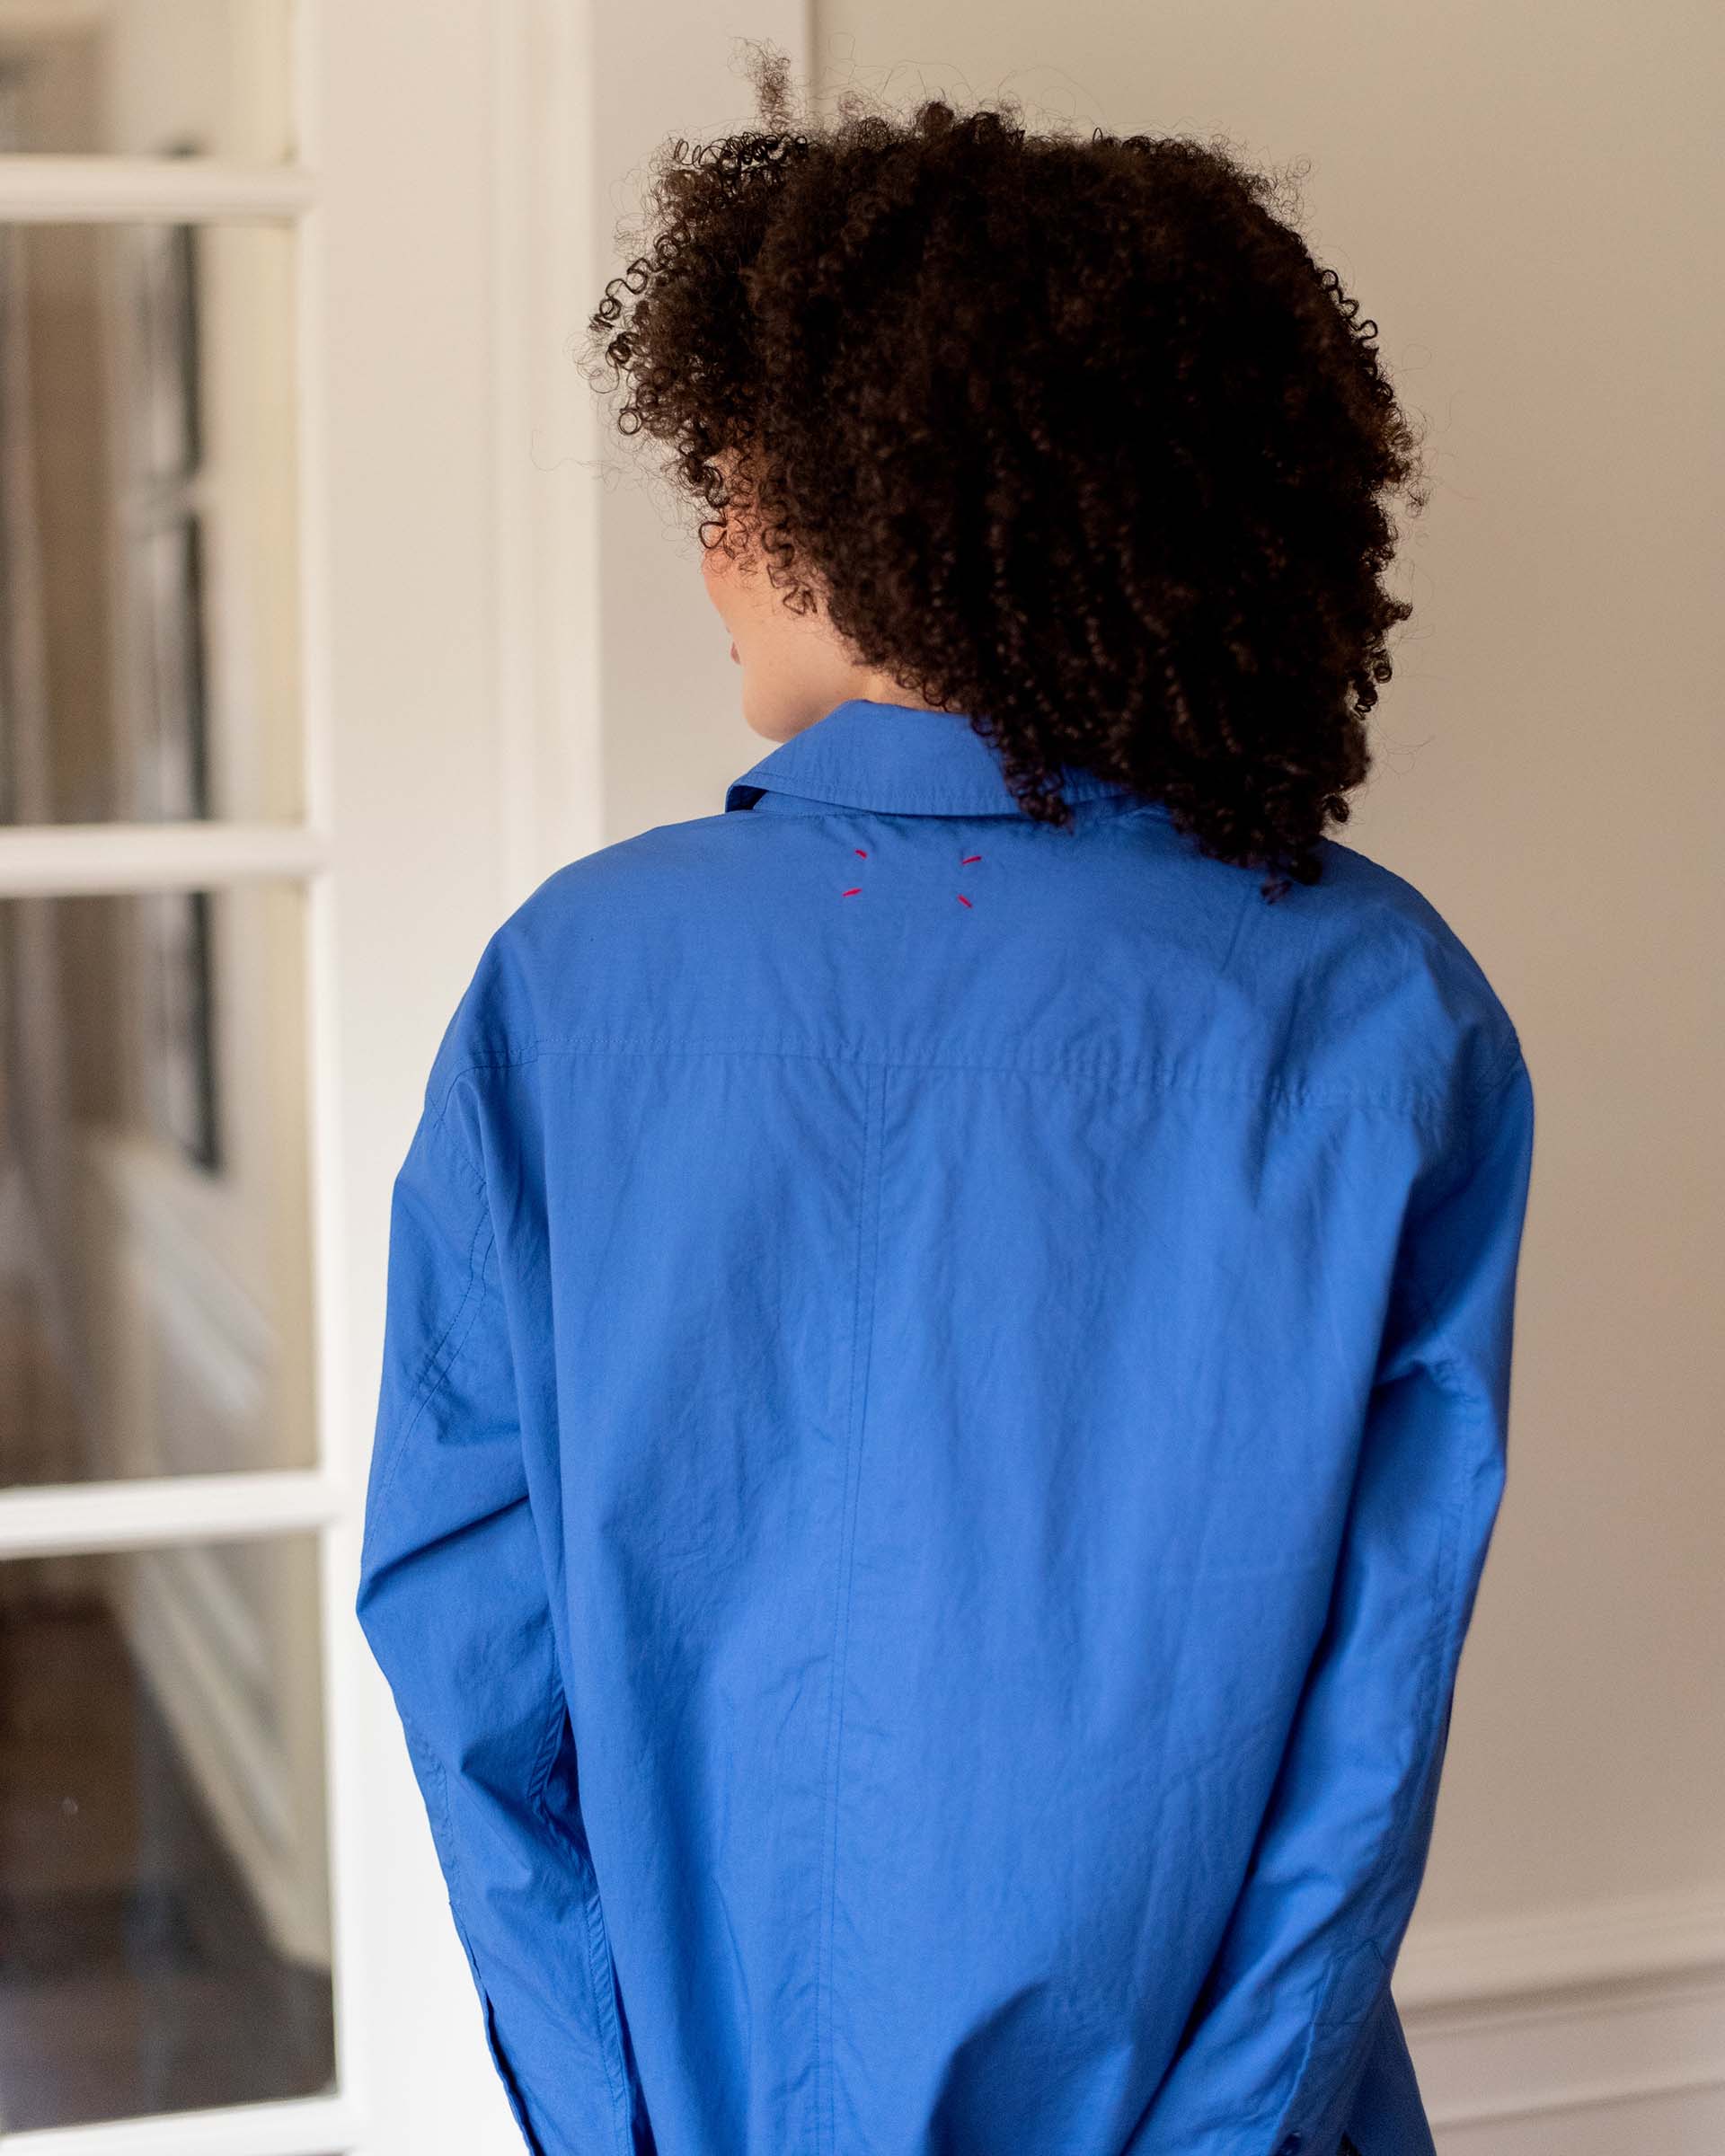 Women's Royal Blue Breathable Relaxed Fit Button Up Shirt Rear View Red Stictch Detail